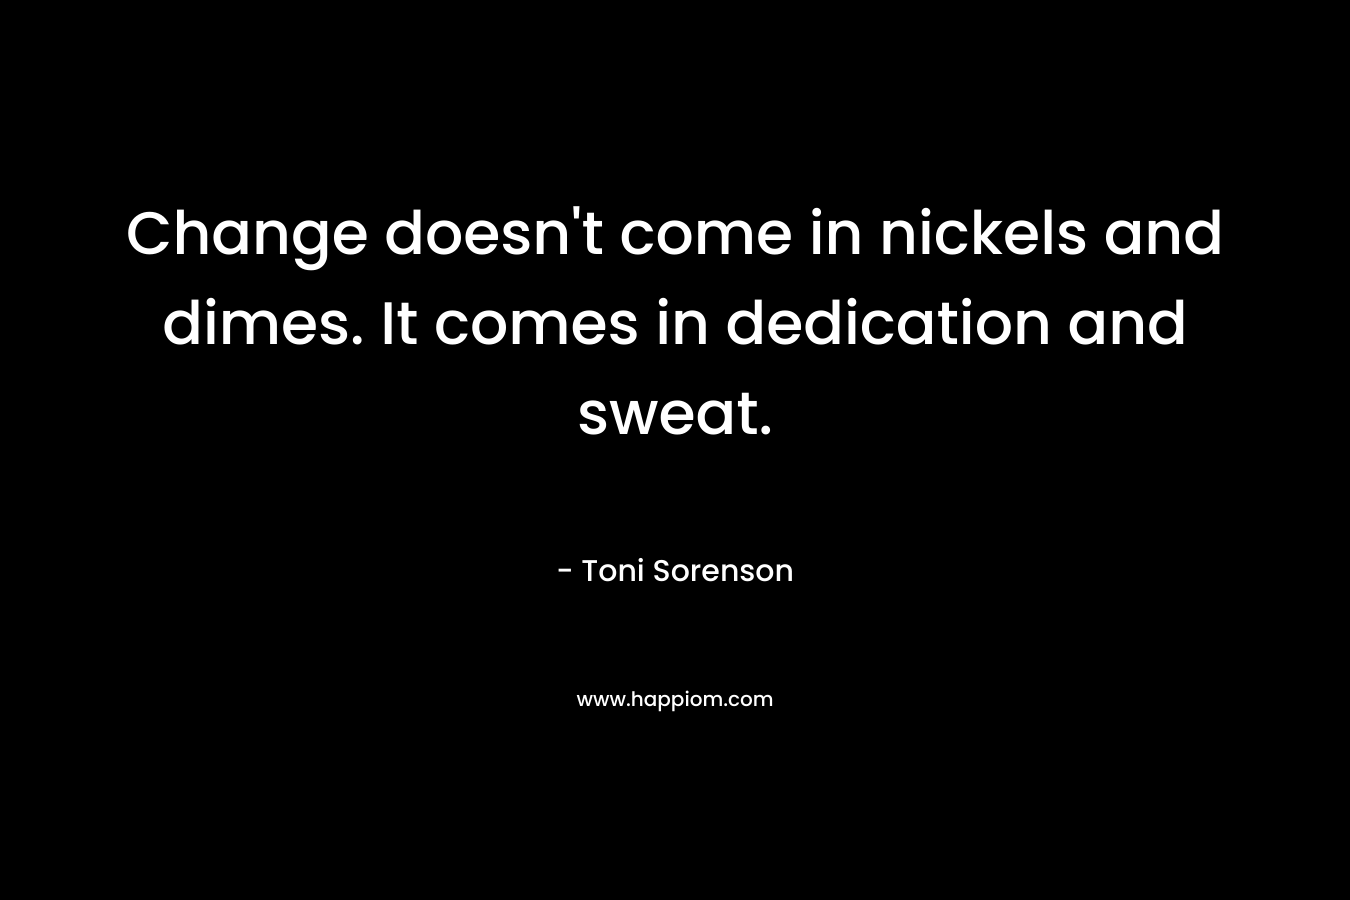 Change doesn’t come in nickels and dimes. It comes in dedication and sweat. – Toni Sorenson